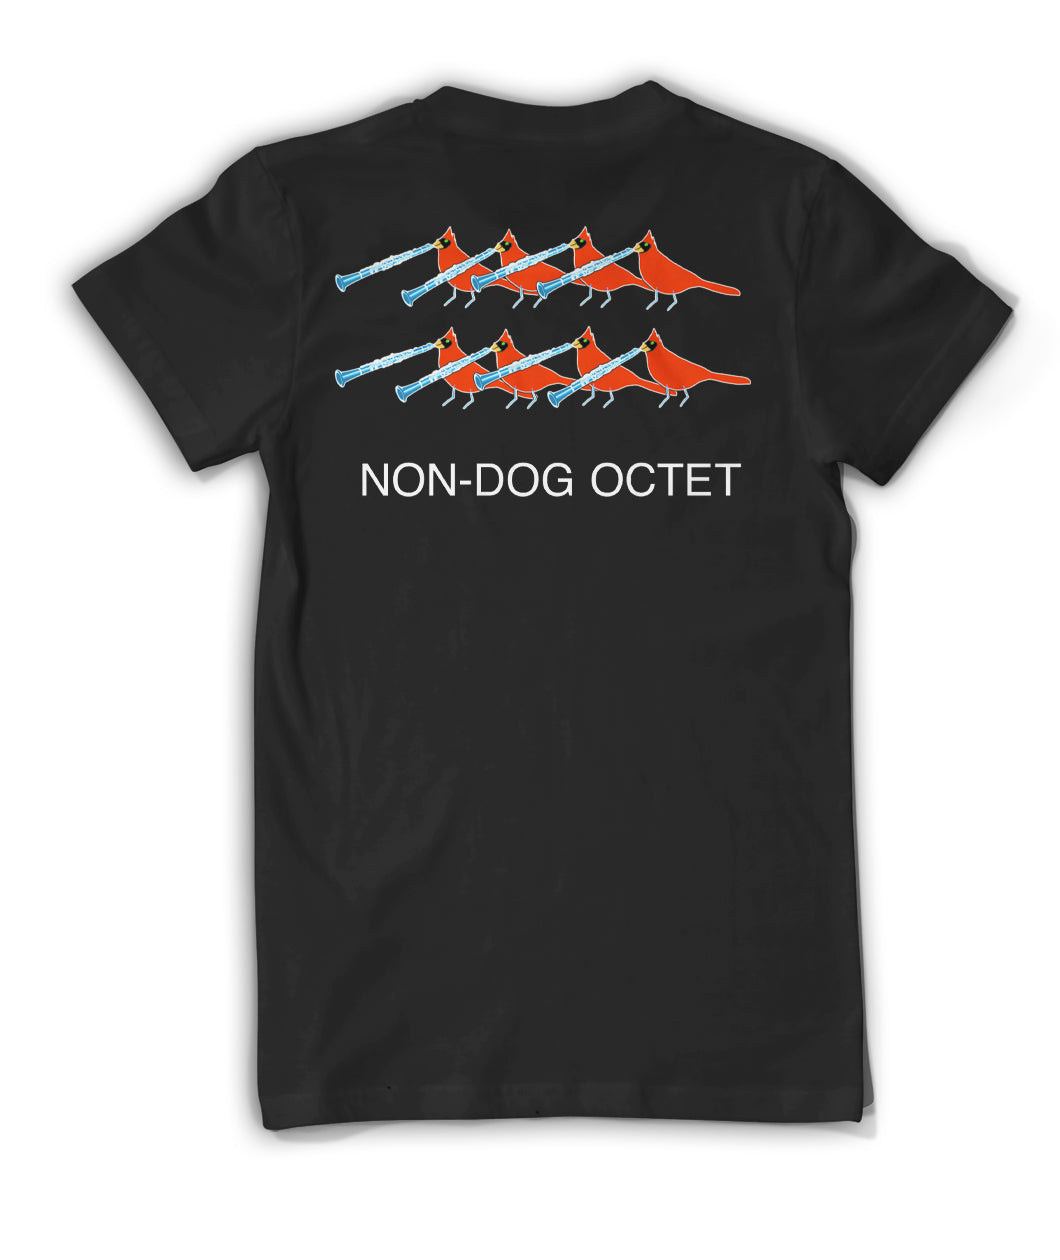 The back of a black t-shirt with eight red cardinals with flutes and text below that reads "NON-DOG OCTECT". From Bill Wurtz. 